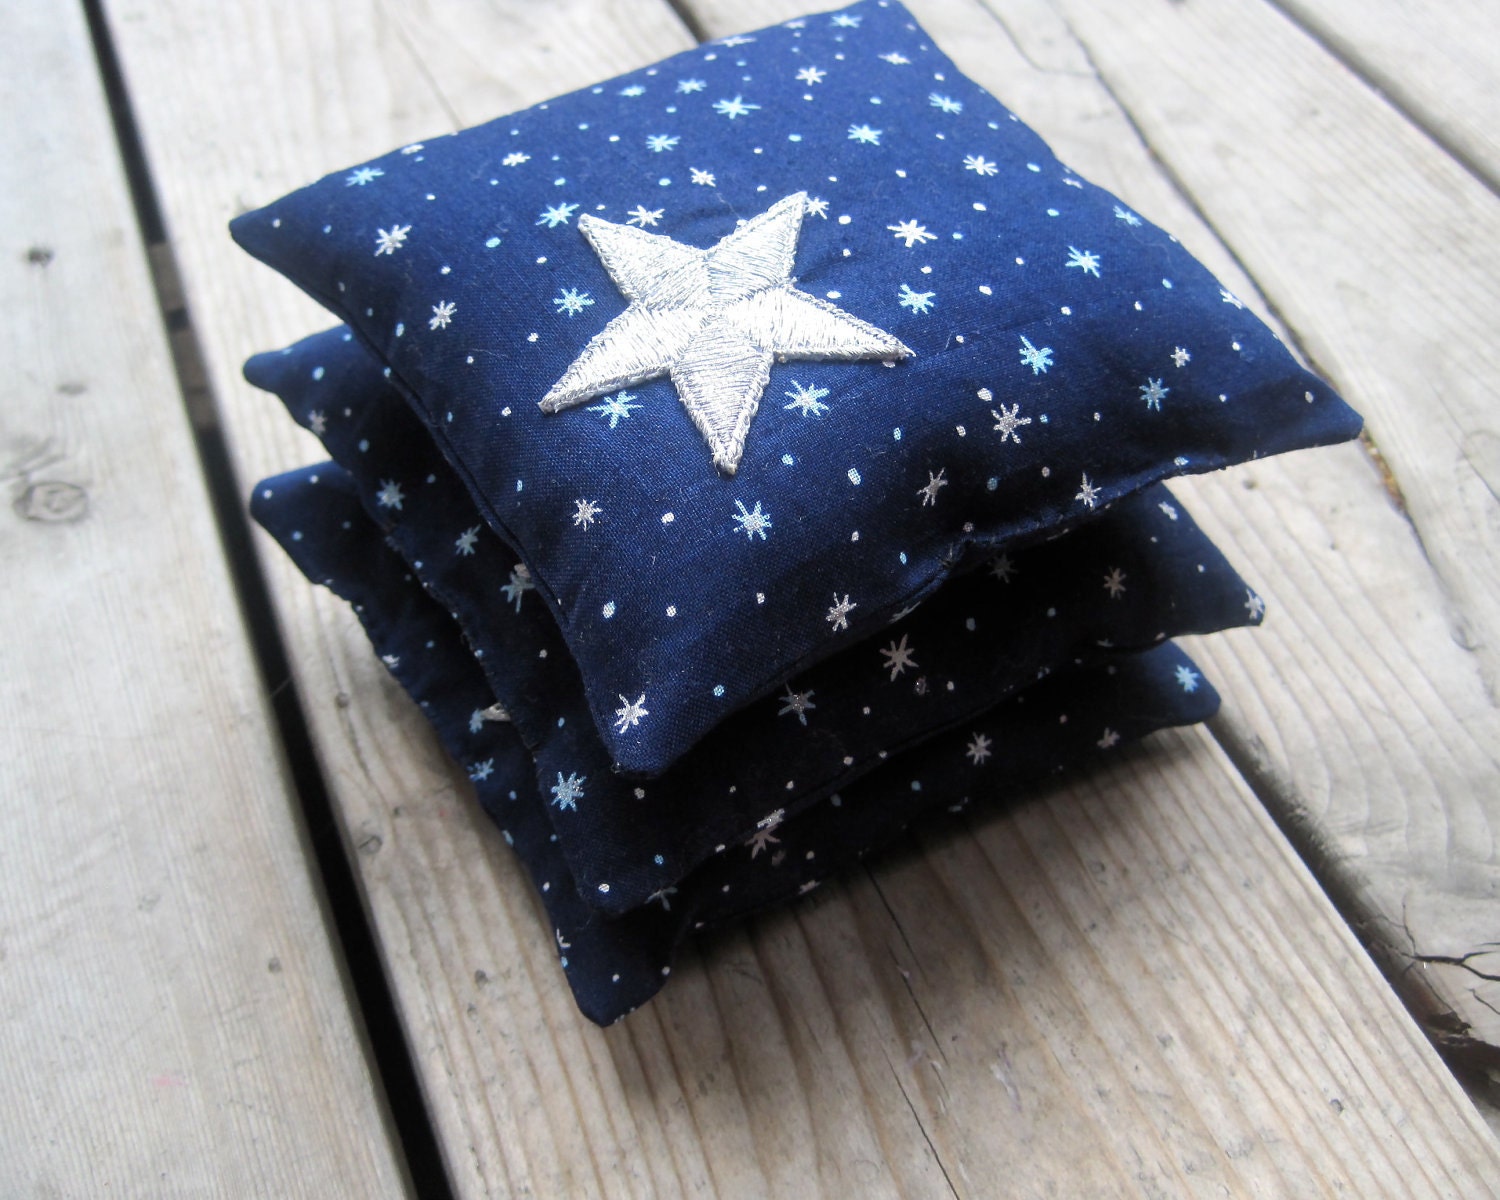 Night Sky Balsam Sachets in Navy Linen Set of 3 - Fall Home Decor, Aromatherapy, Hostess Favours, Spa Bathroom - AS SEEN in Cool Mom Picks - SewnNatural